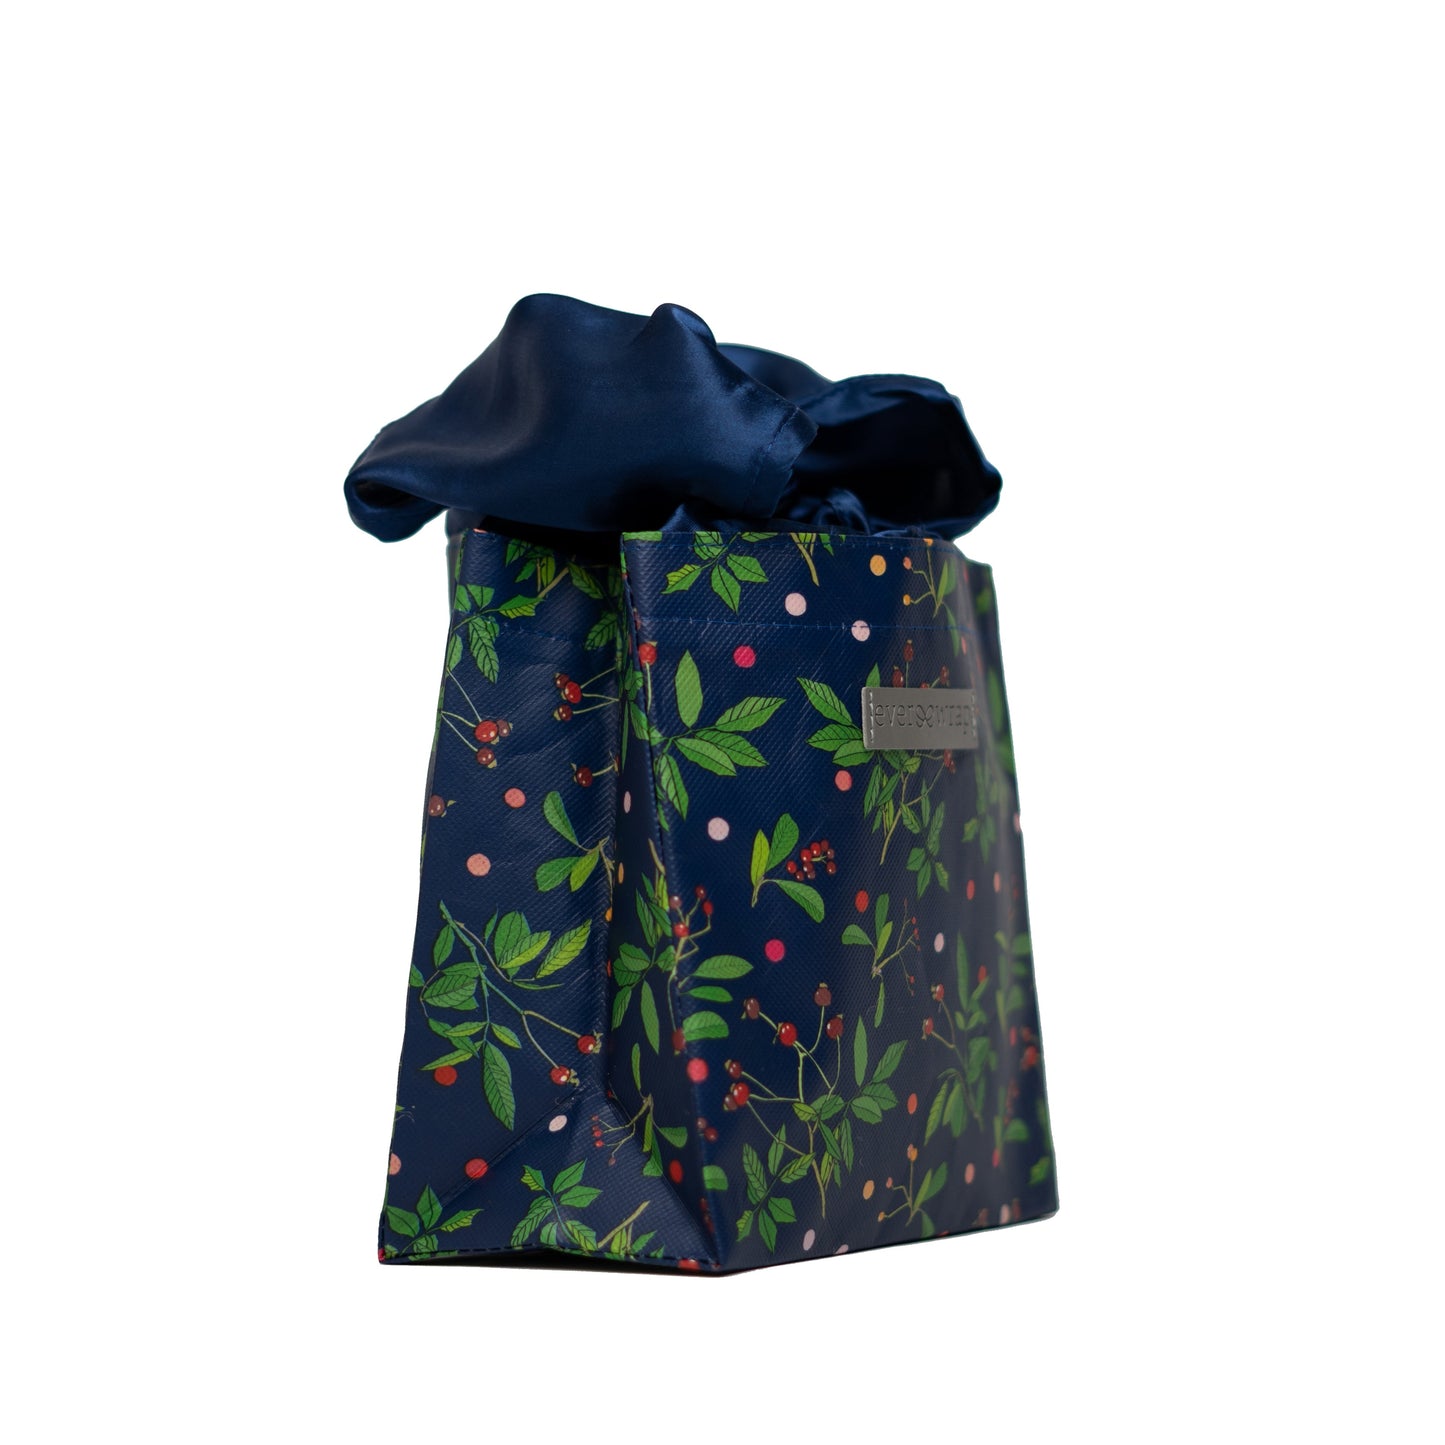 Blue Reusable gift bag, Berry and Green Foliage with Royal Blue Satin Bow makes storing and reusing this gift bag an easy sustainable zero-waste choice - EverWrap